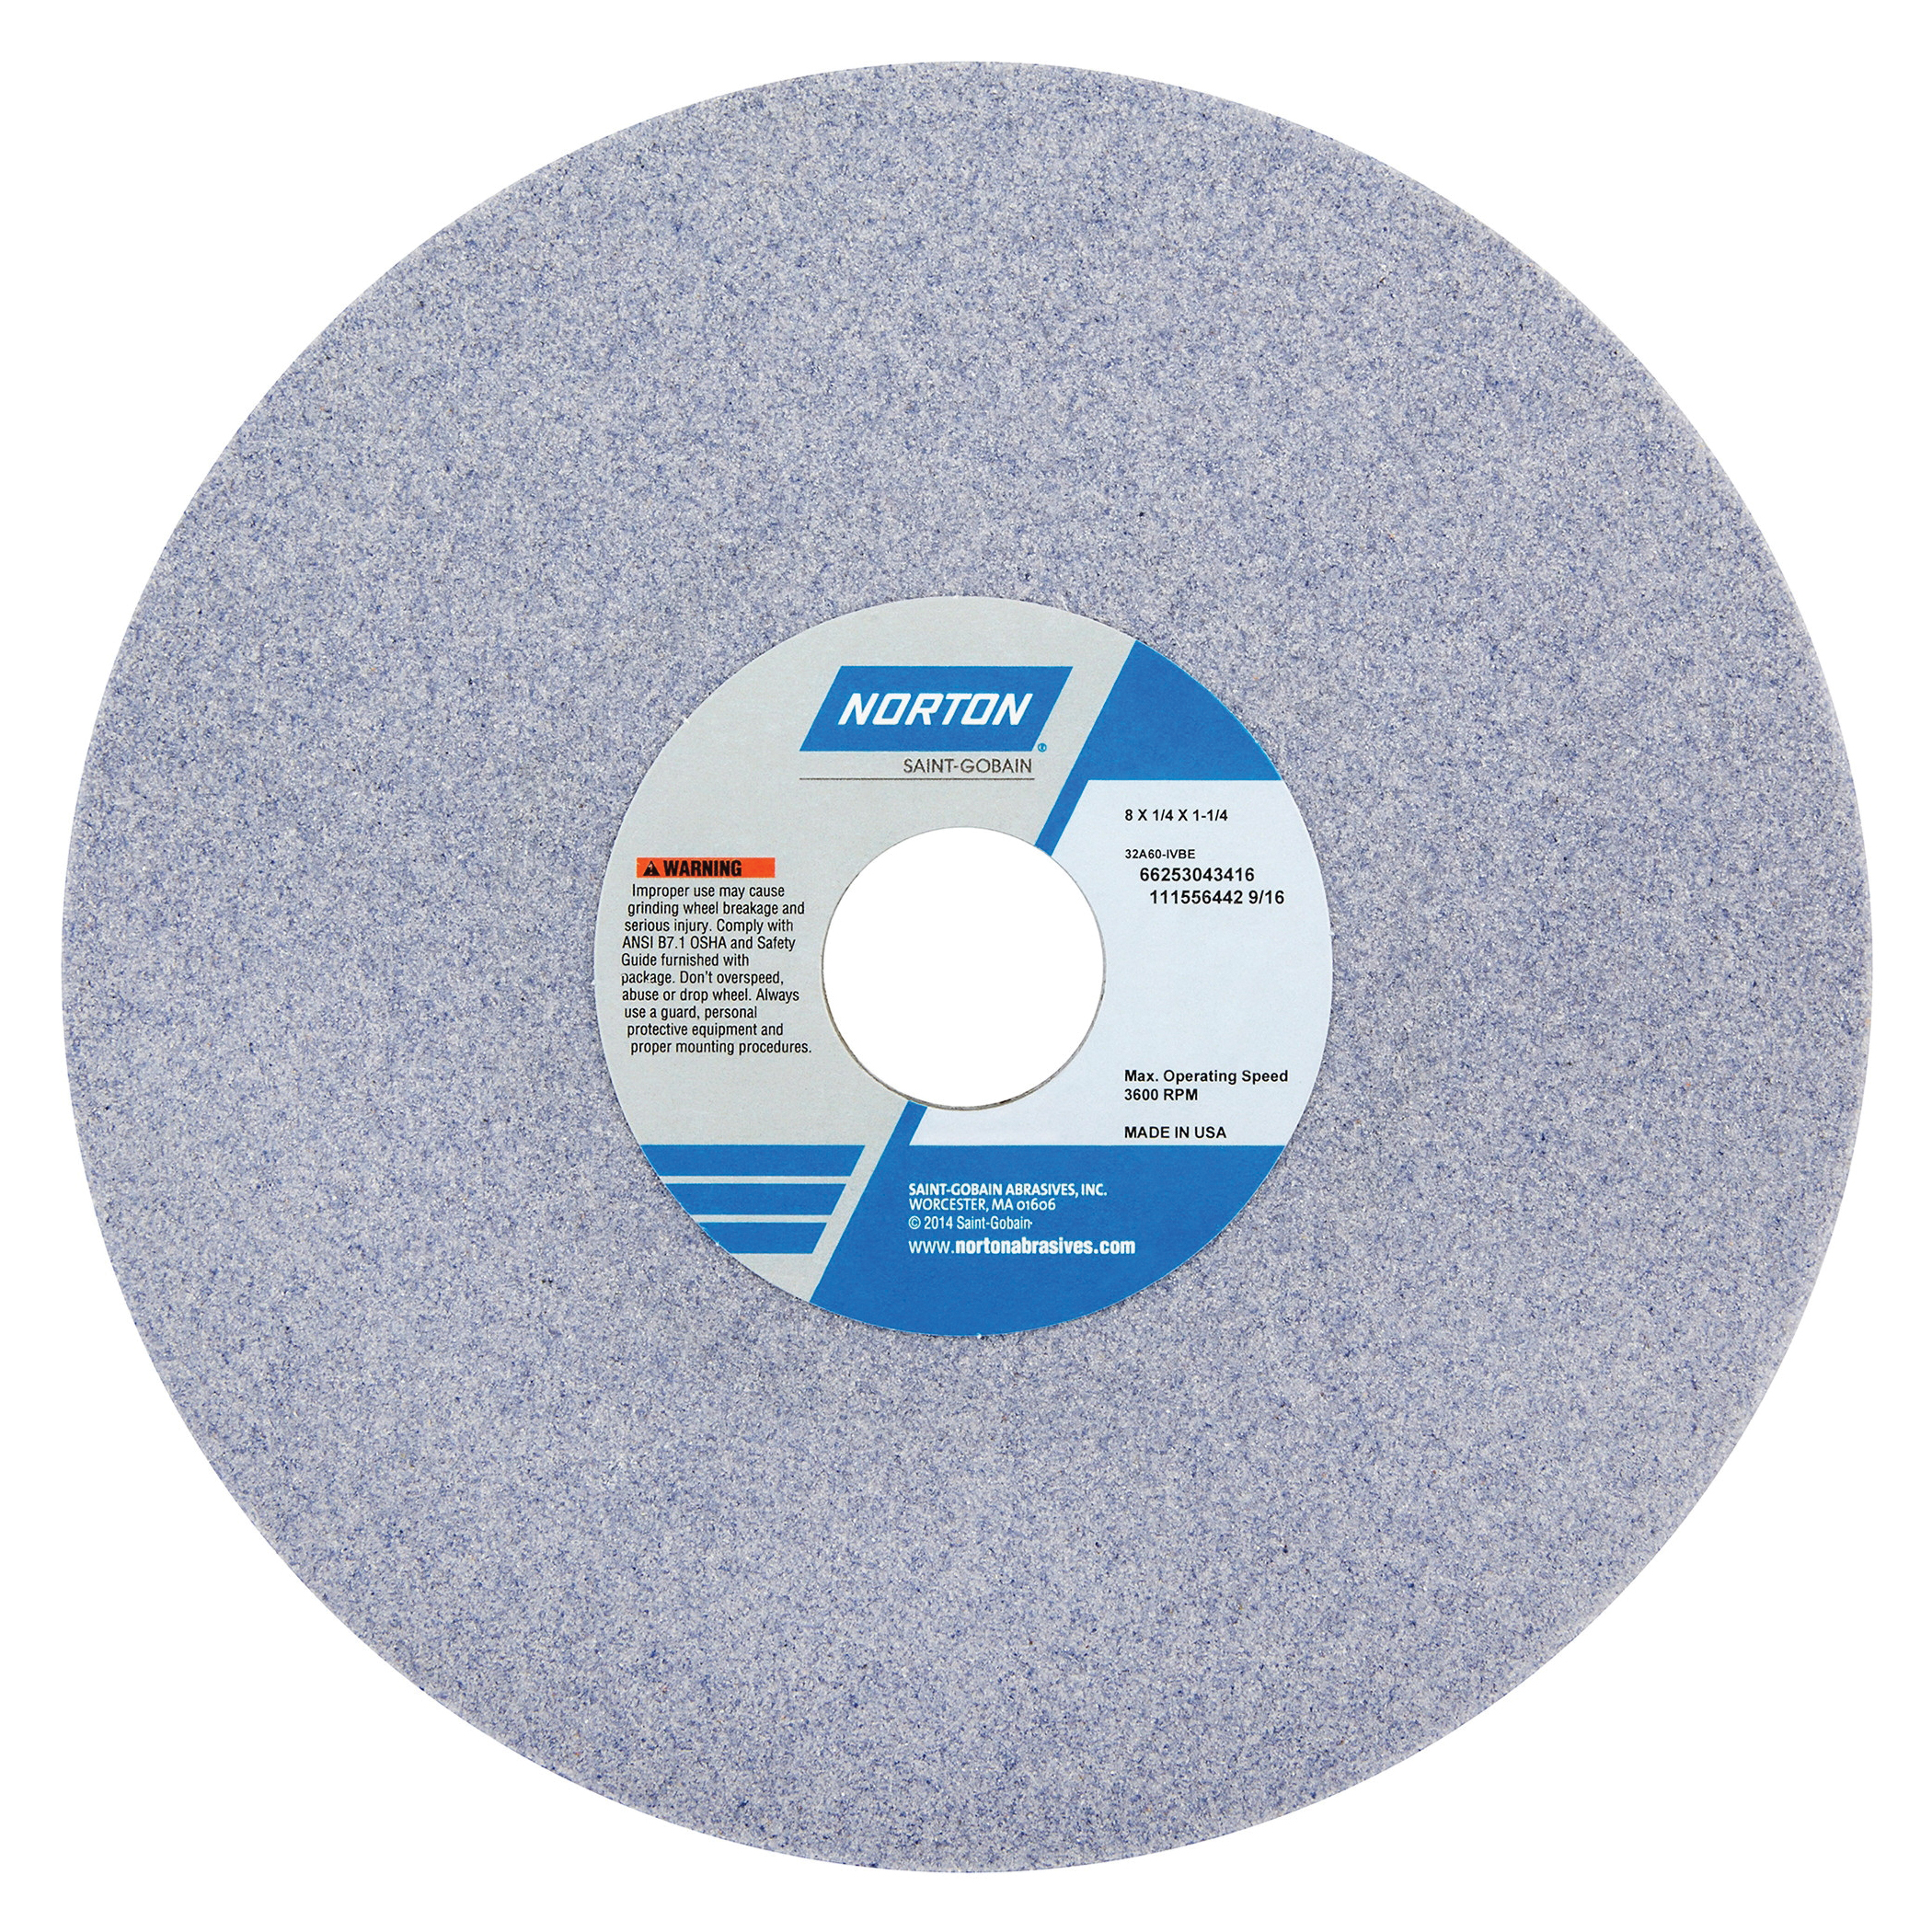 Norton® 66253043425 32A Straight Toolroom Wheel, 8 in Dia x 1/4 in THK, 1-1/4 in Center Hole, 80 Grit, Aluminum Oxide Abrasive